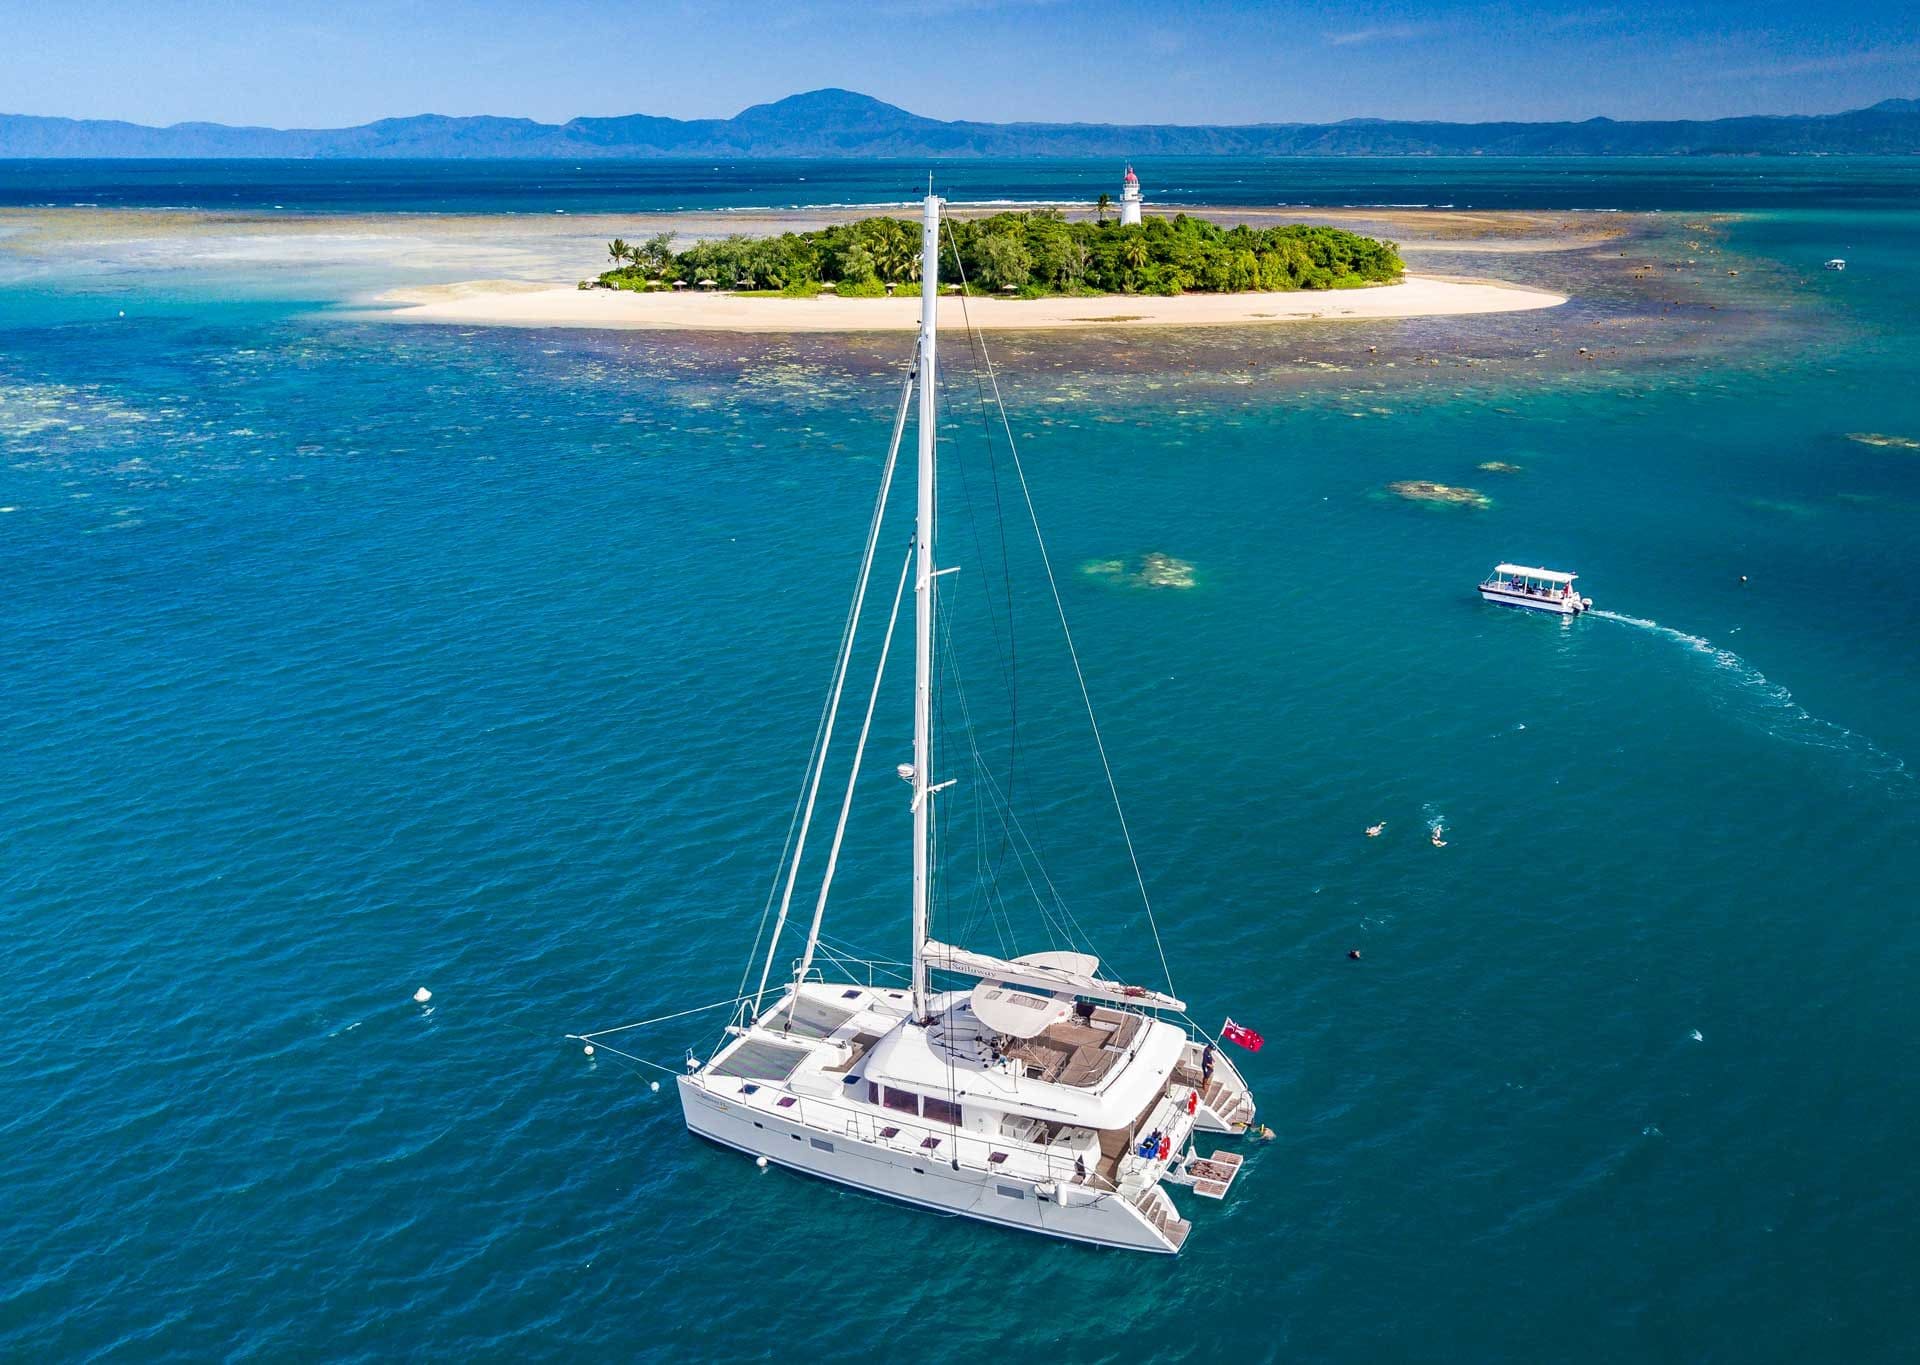 port douglas day tour from cairns